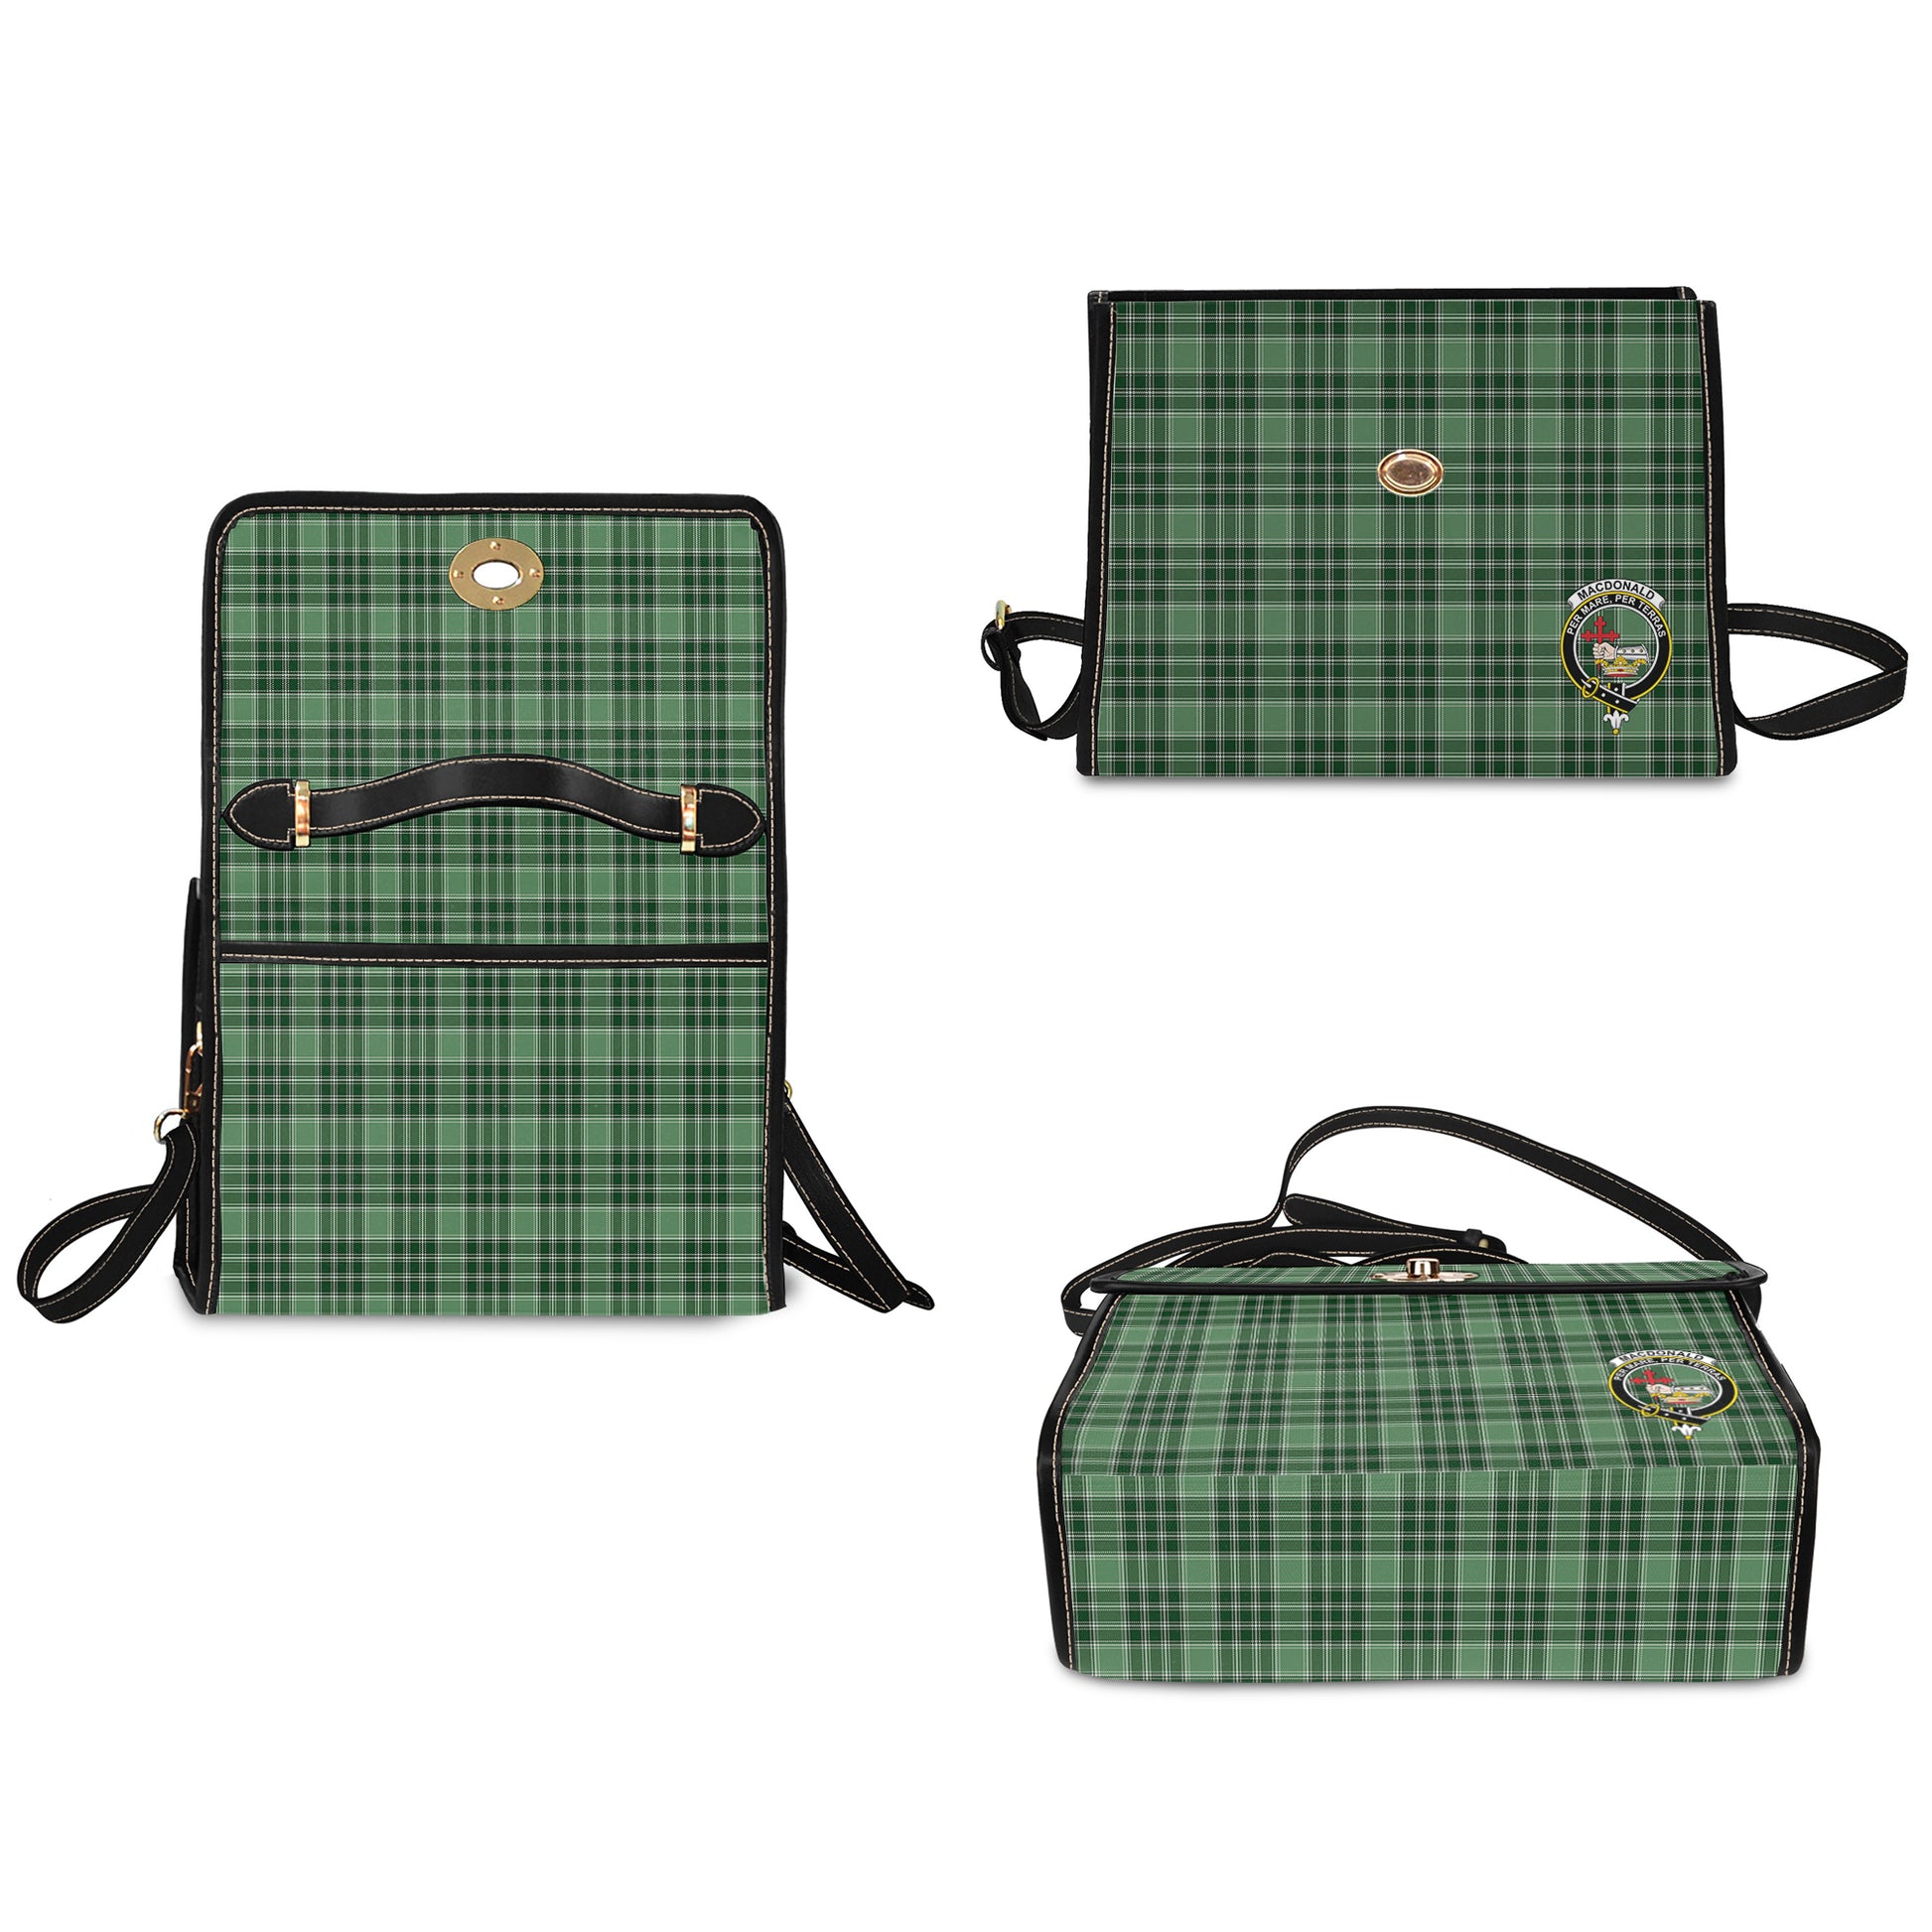 macdonald-lord-of-the-isles-hunting-tartan-leather-strap-waterproof-canvas-bag-with-family-crest